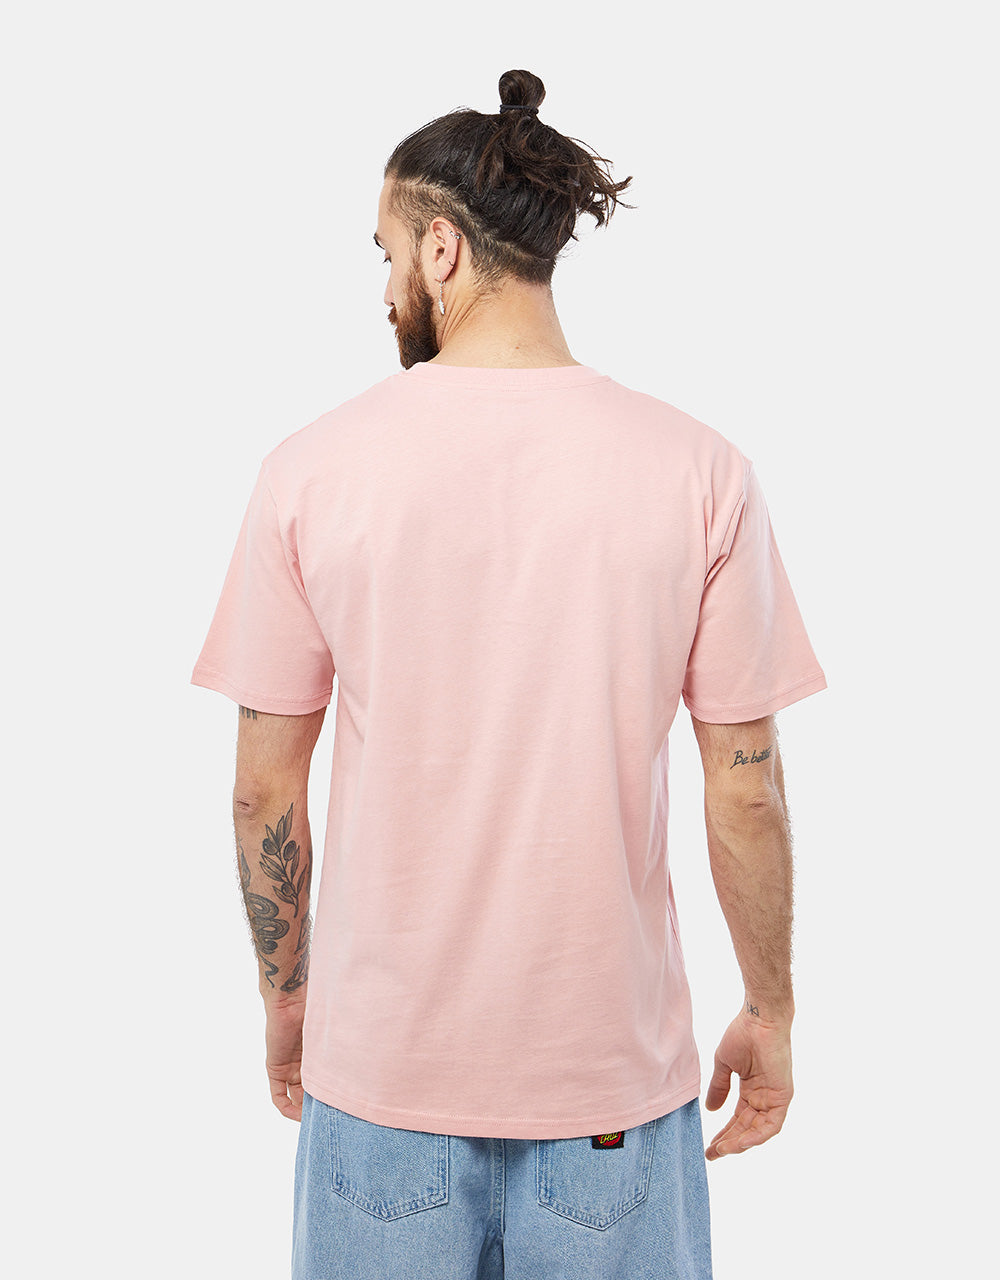 Route One Classic T-Shirt - Vintage Pink